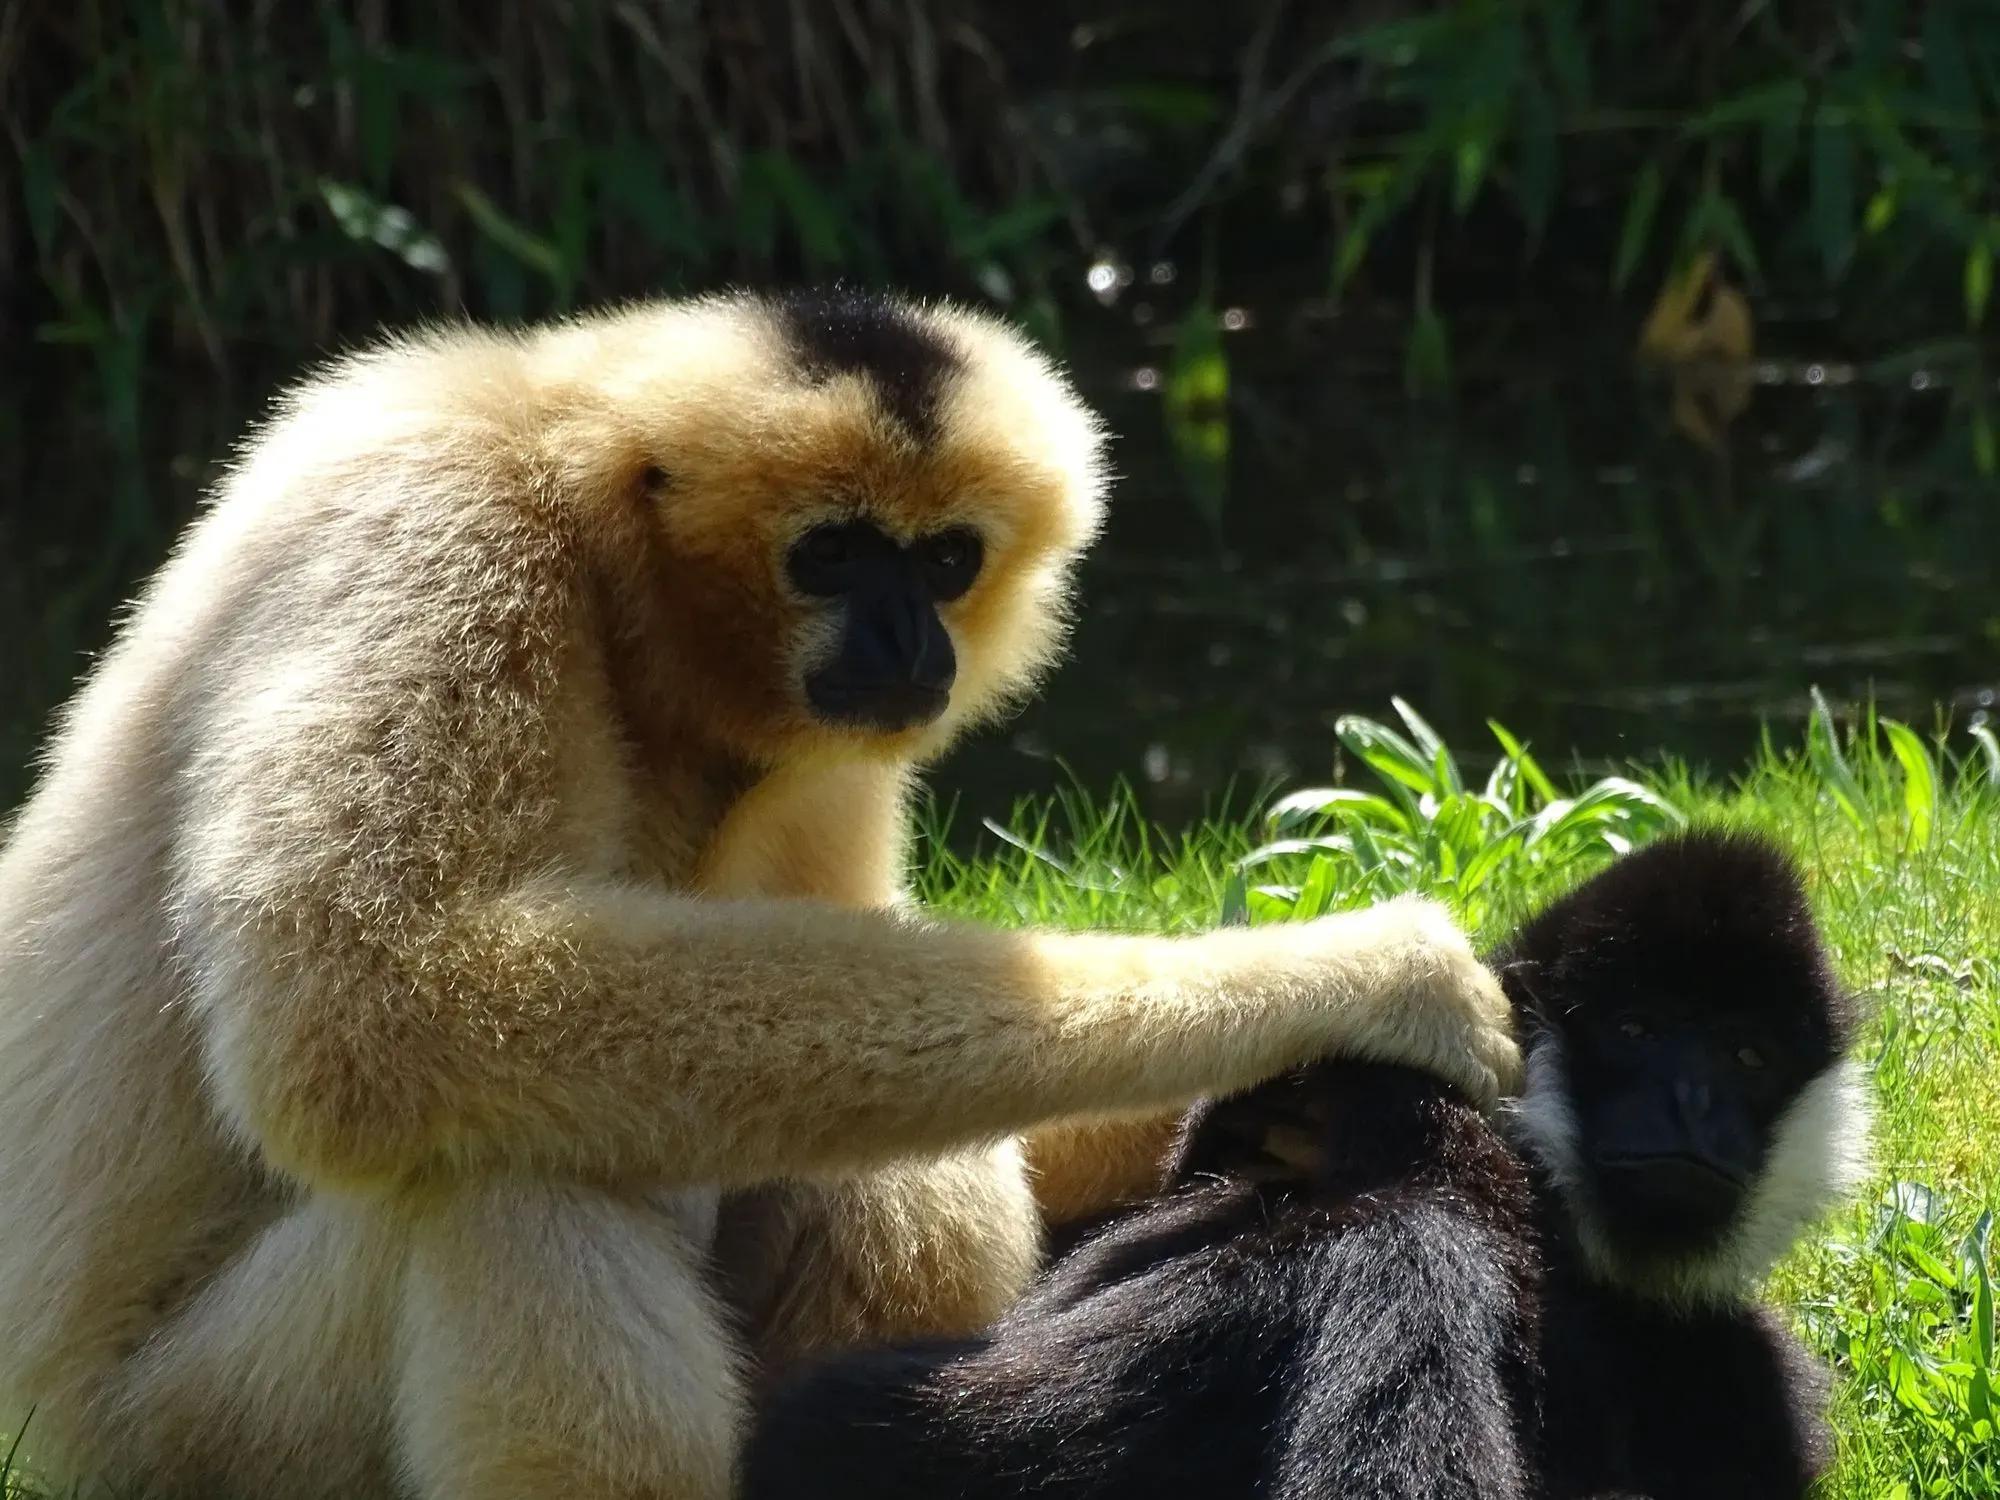 Northern white-cheeked gibbons are omnivores.